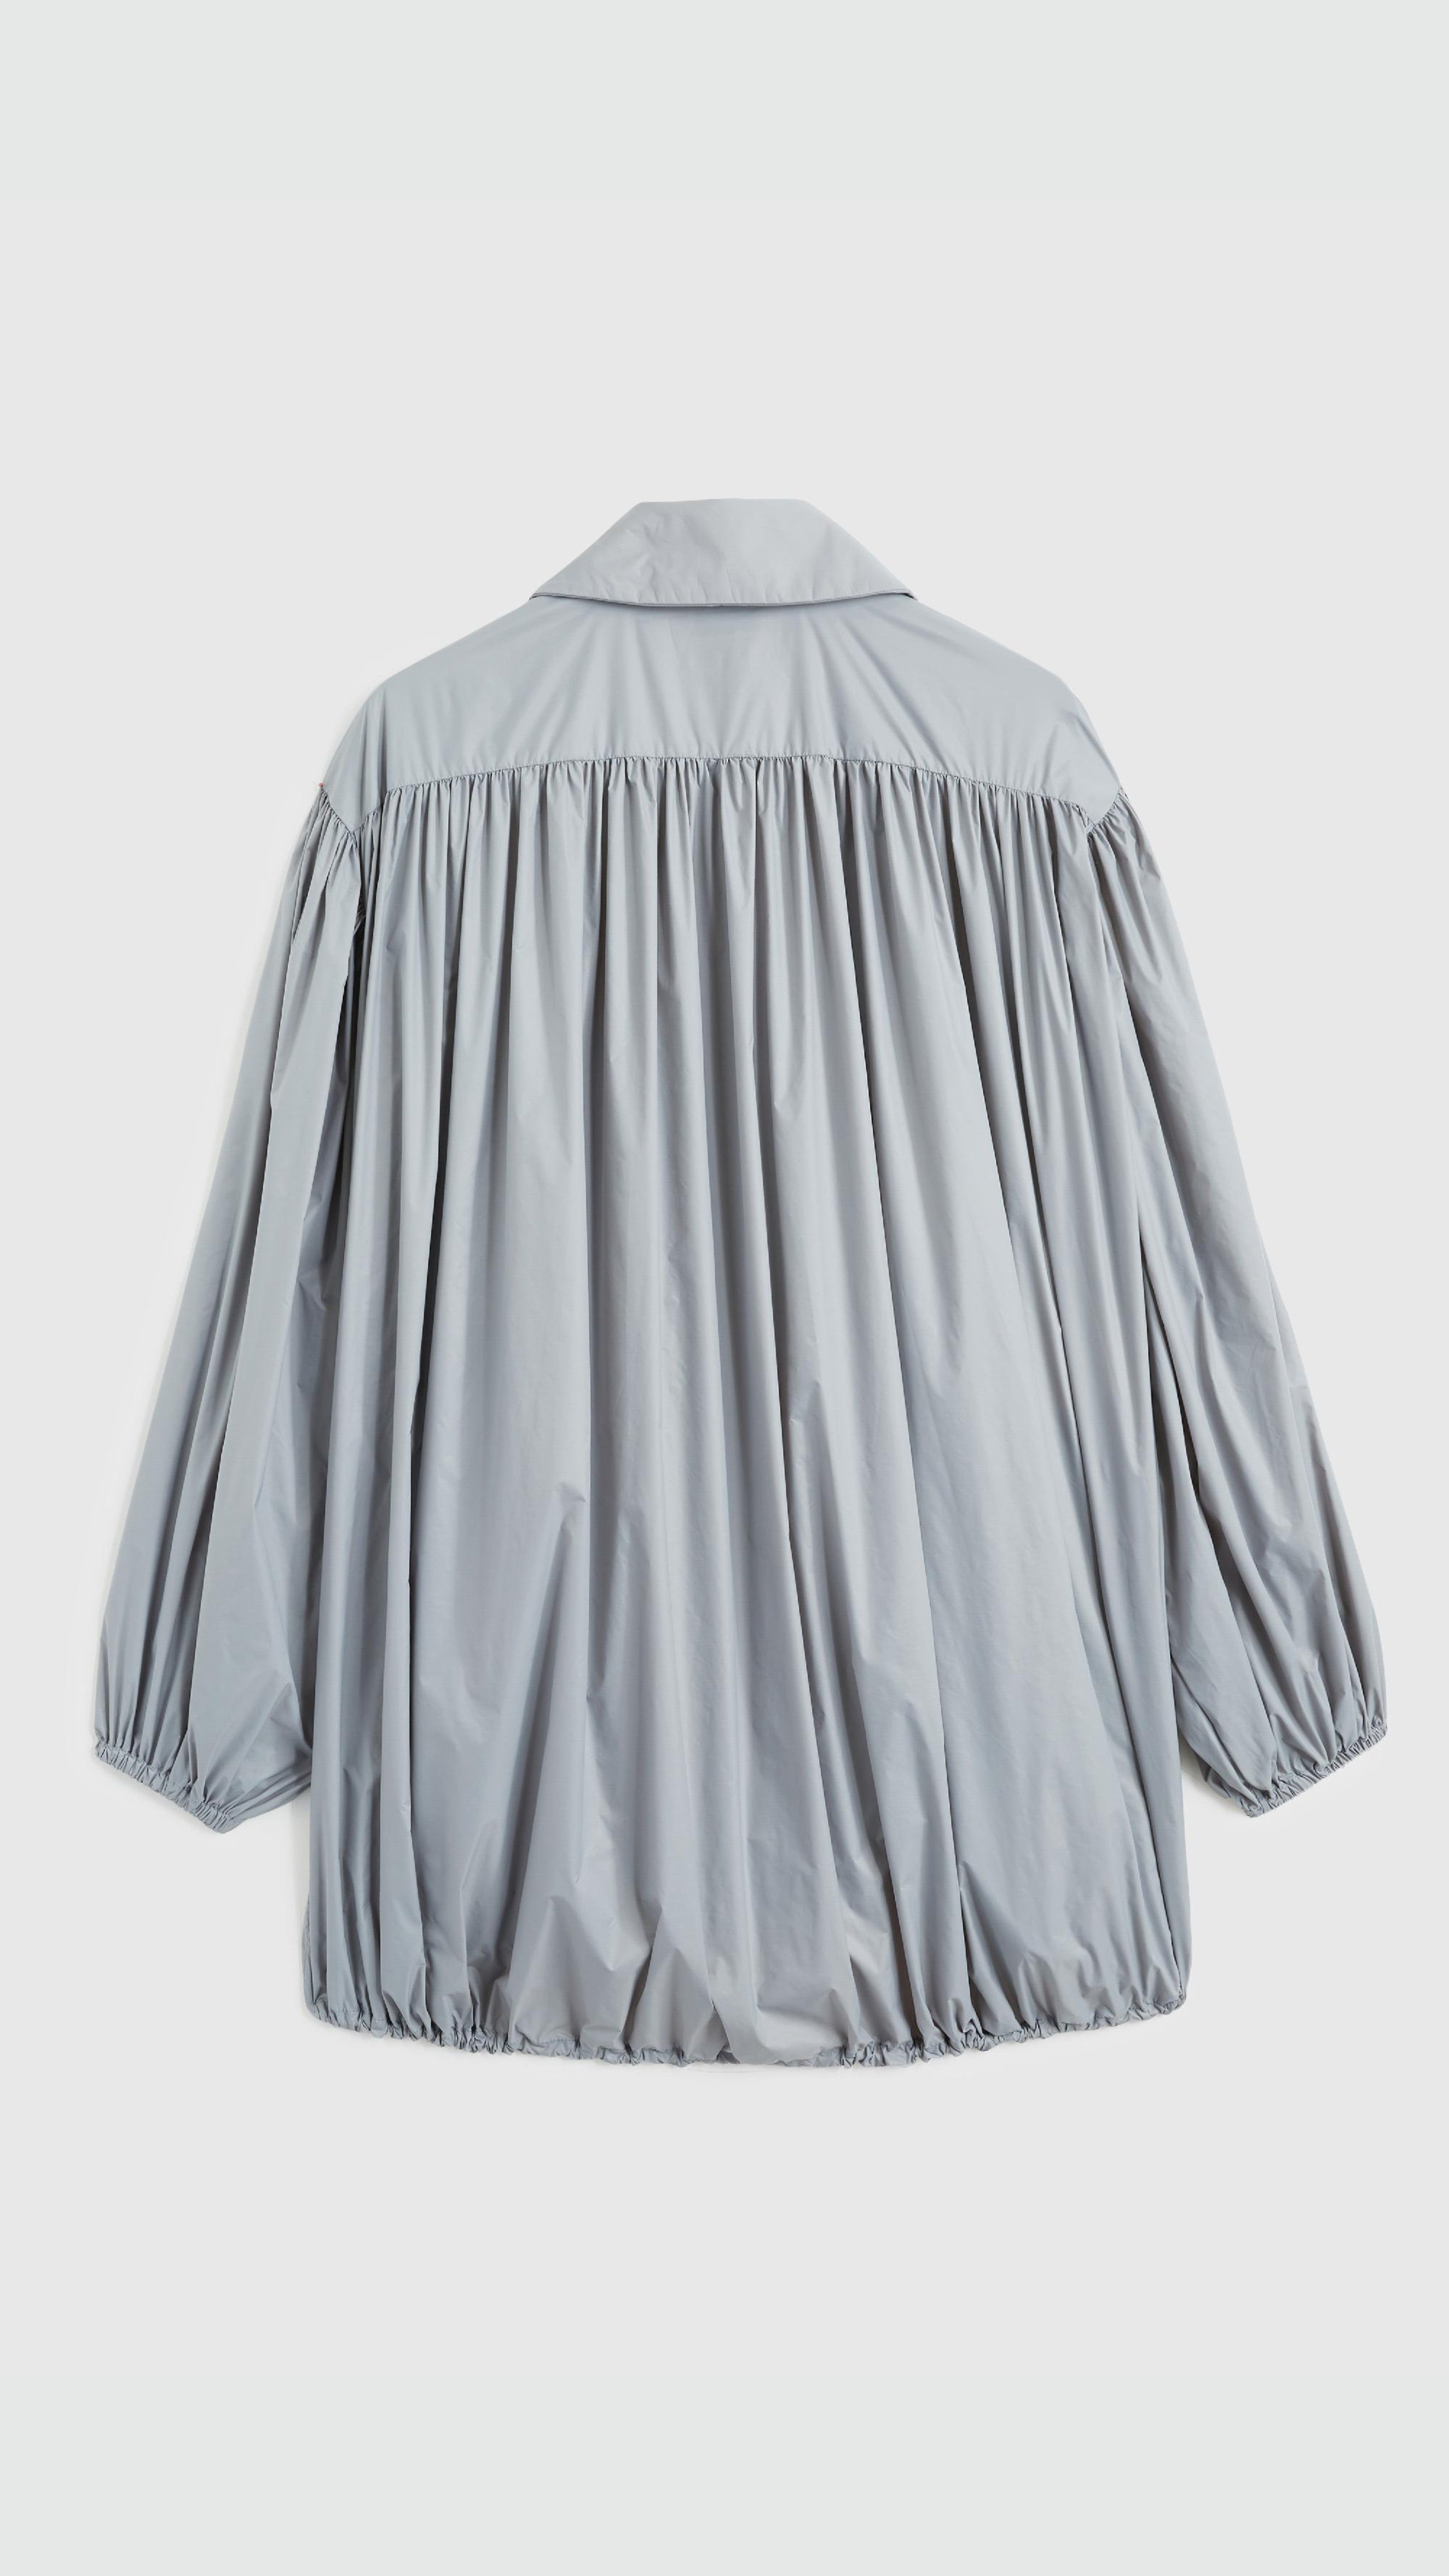 Rochas Paris Fashion Oversized Wind Jacket in a sky silver blue. Pleated draping across the front makes this elegant and luxurious outerwear jacket. Product photo shown from the back. 